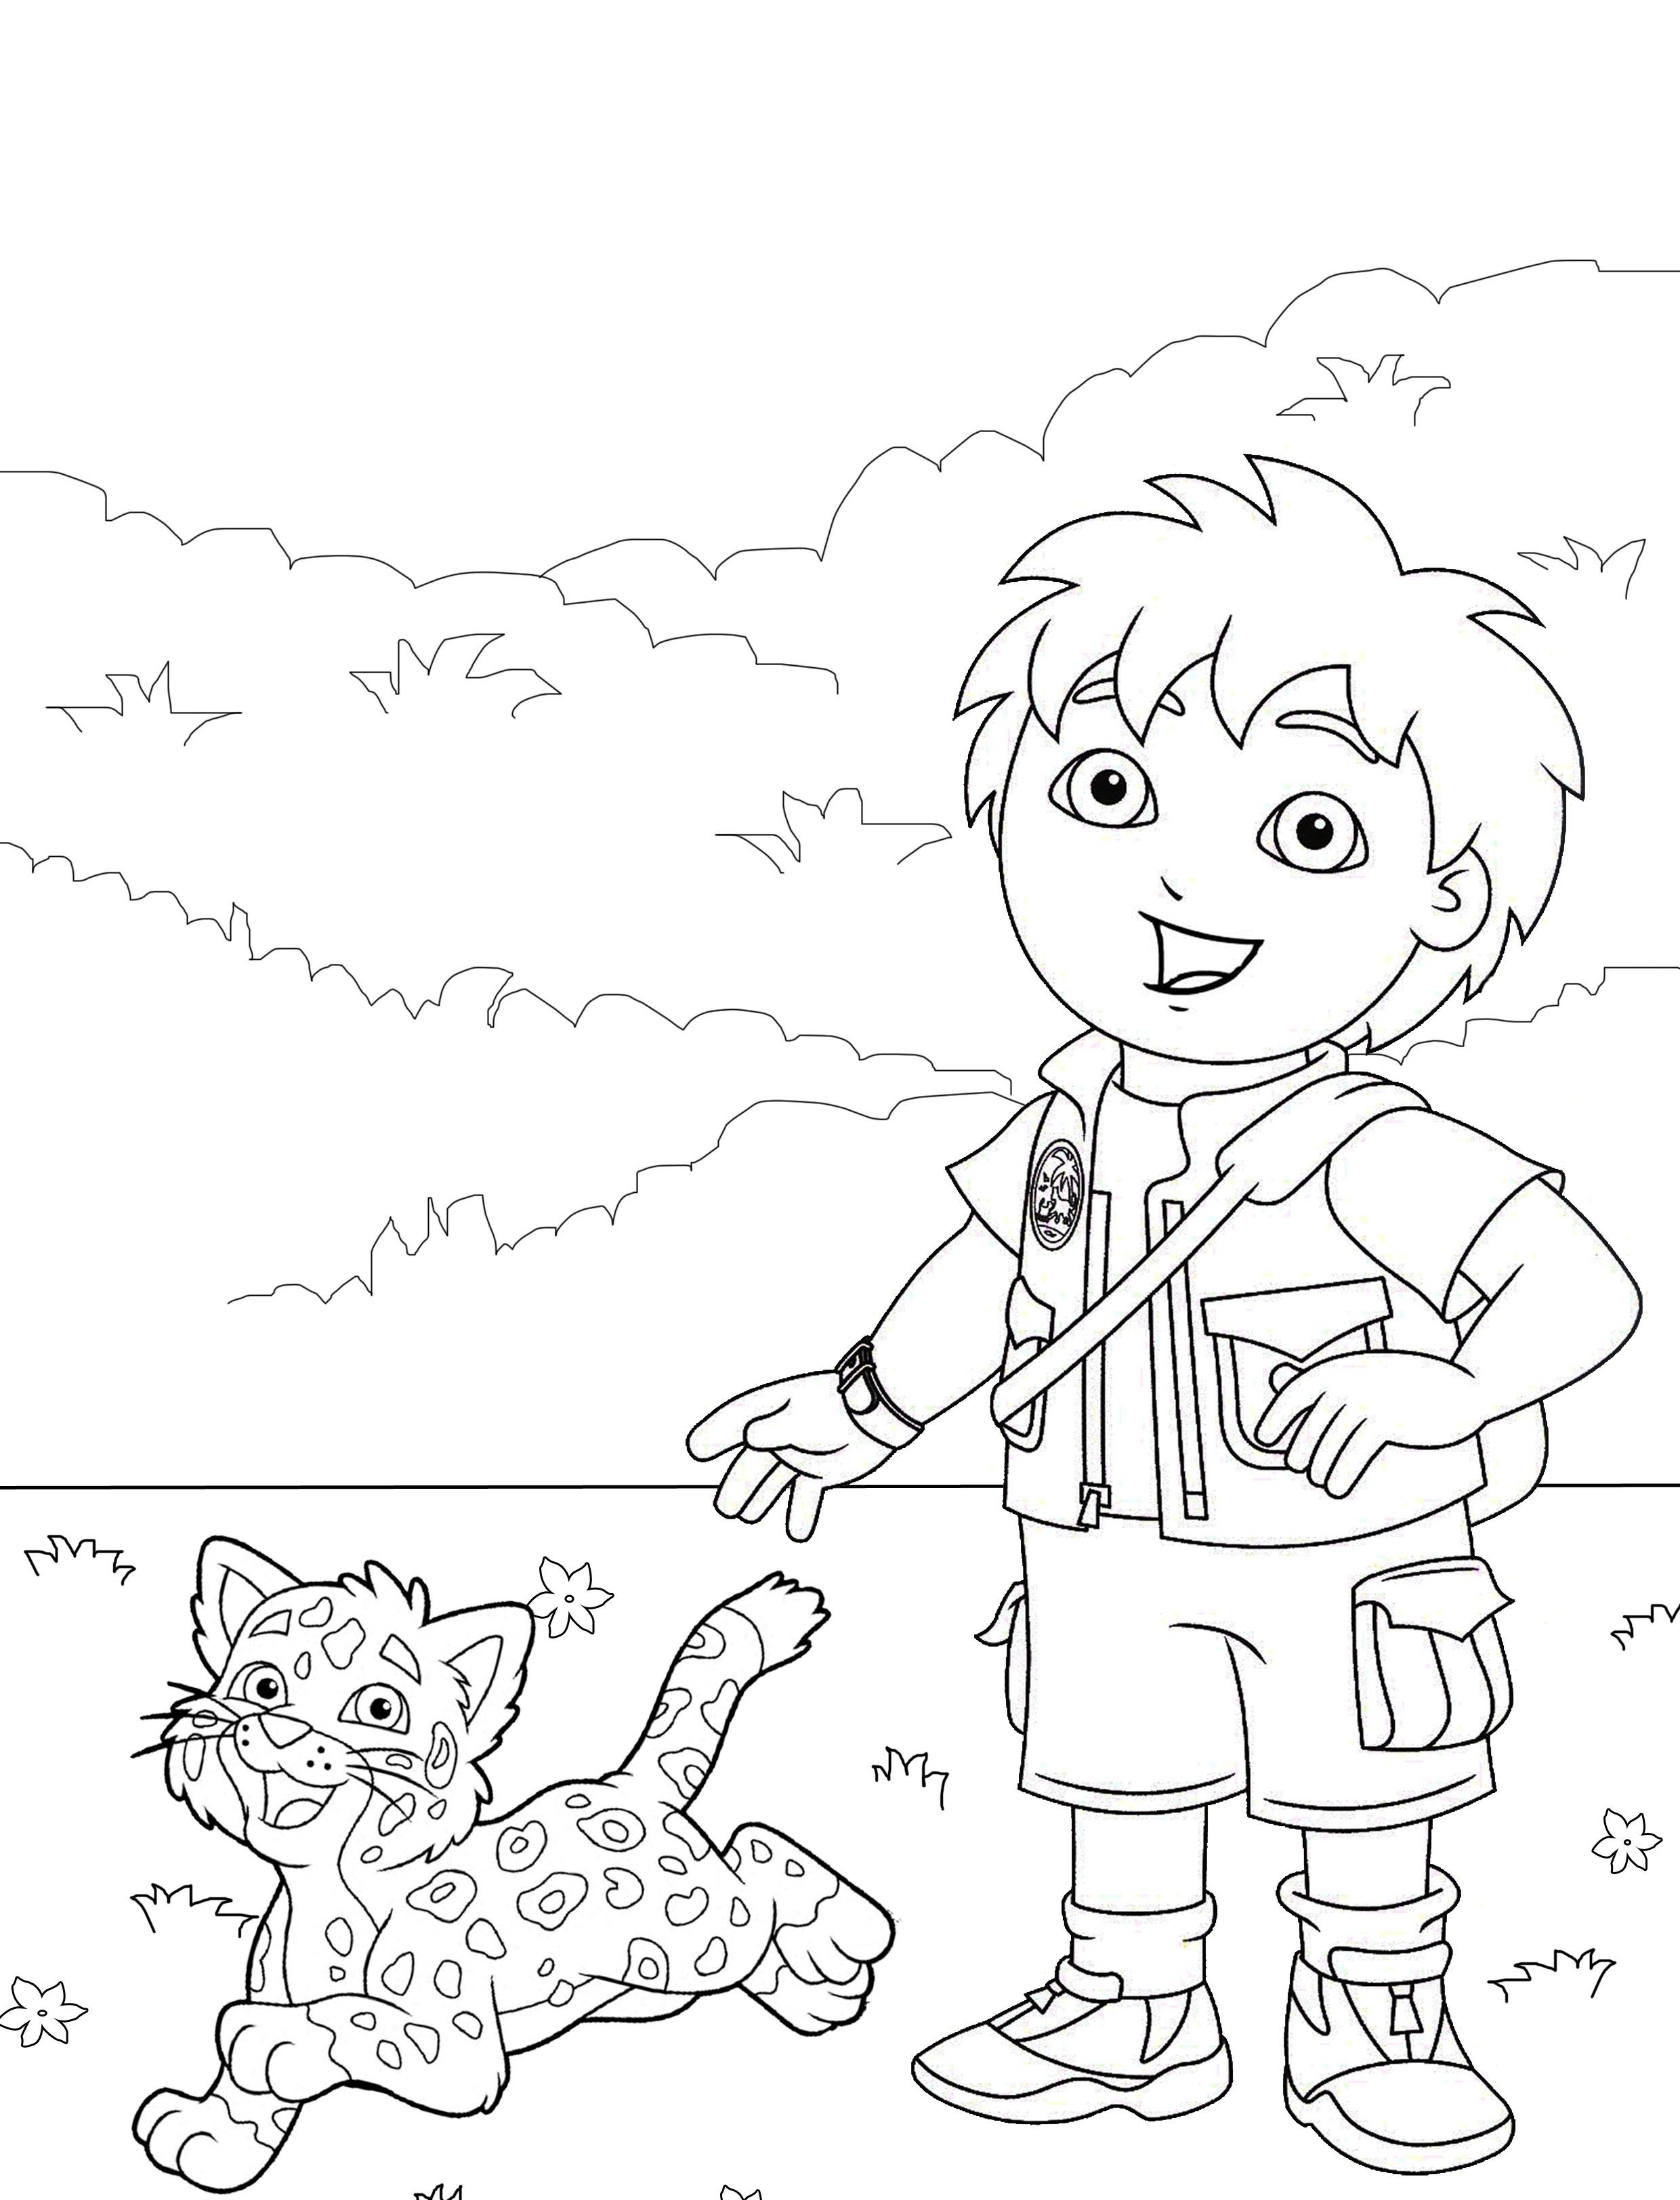 Printable Diego Coloring Pages | Coloring Me